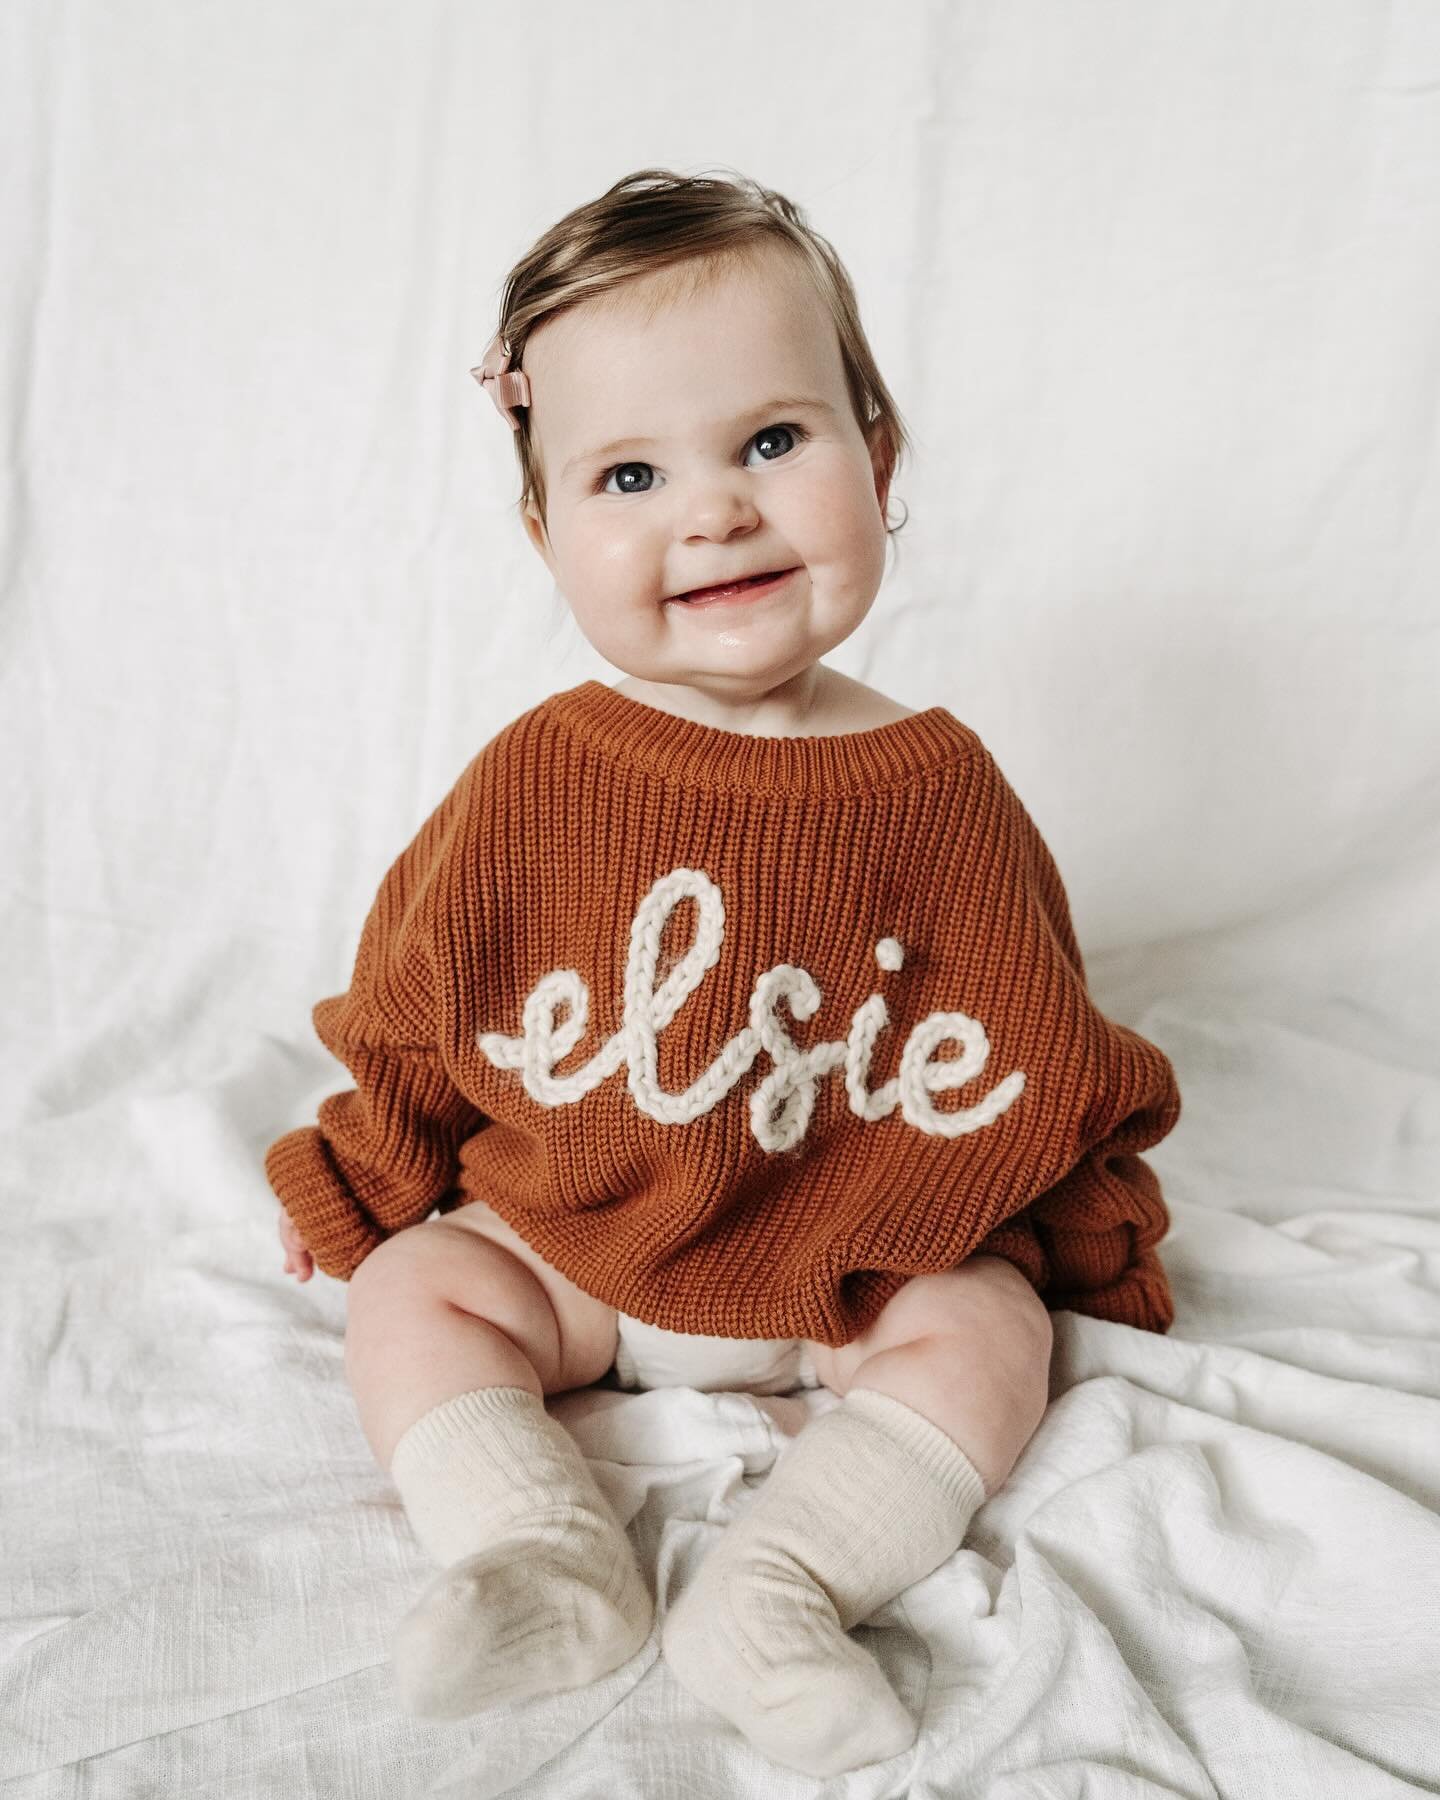 8 months of our sweet Elsie girl. She has two teeth and loves food! She still thinks her brother is the funniest thing in the entire world. Elsie loves to smile at everyone and love to people watch. She&rsquo;s such a joy and we are so in love with h